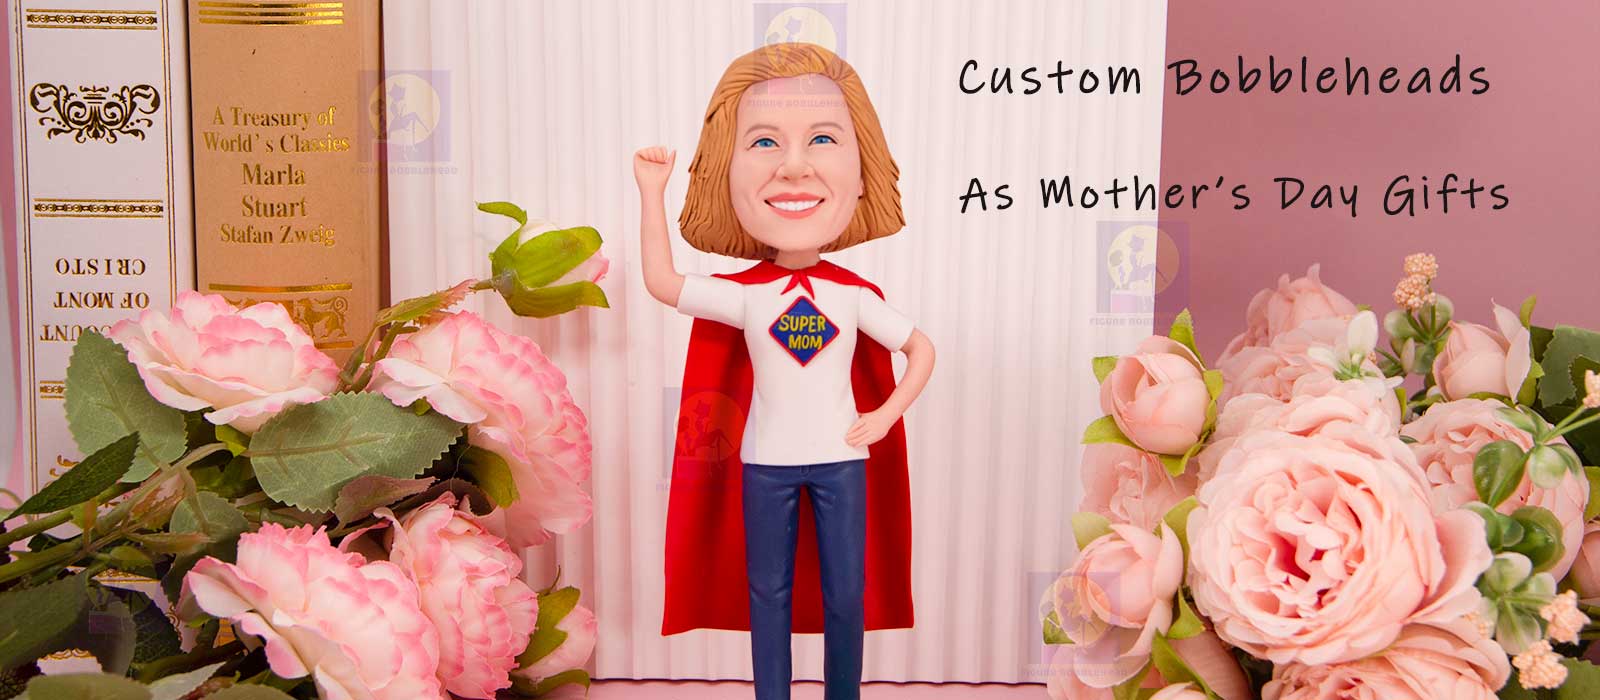 Customize Bobblehead Dolls For Your Mom As Mother's Day Gifts